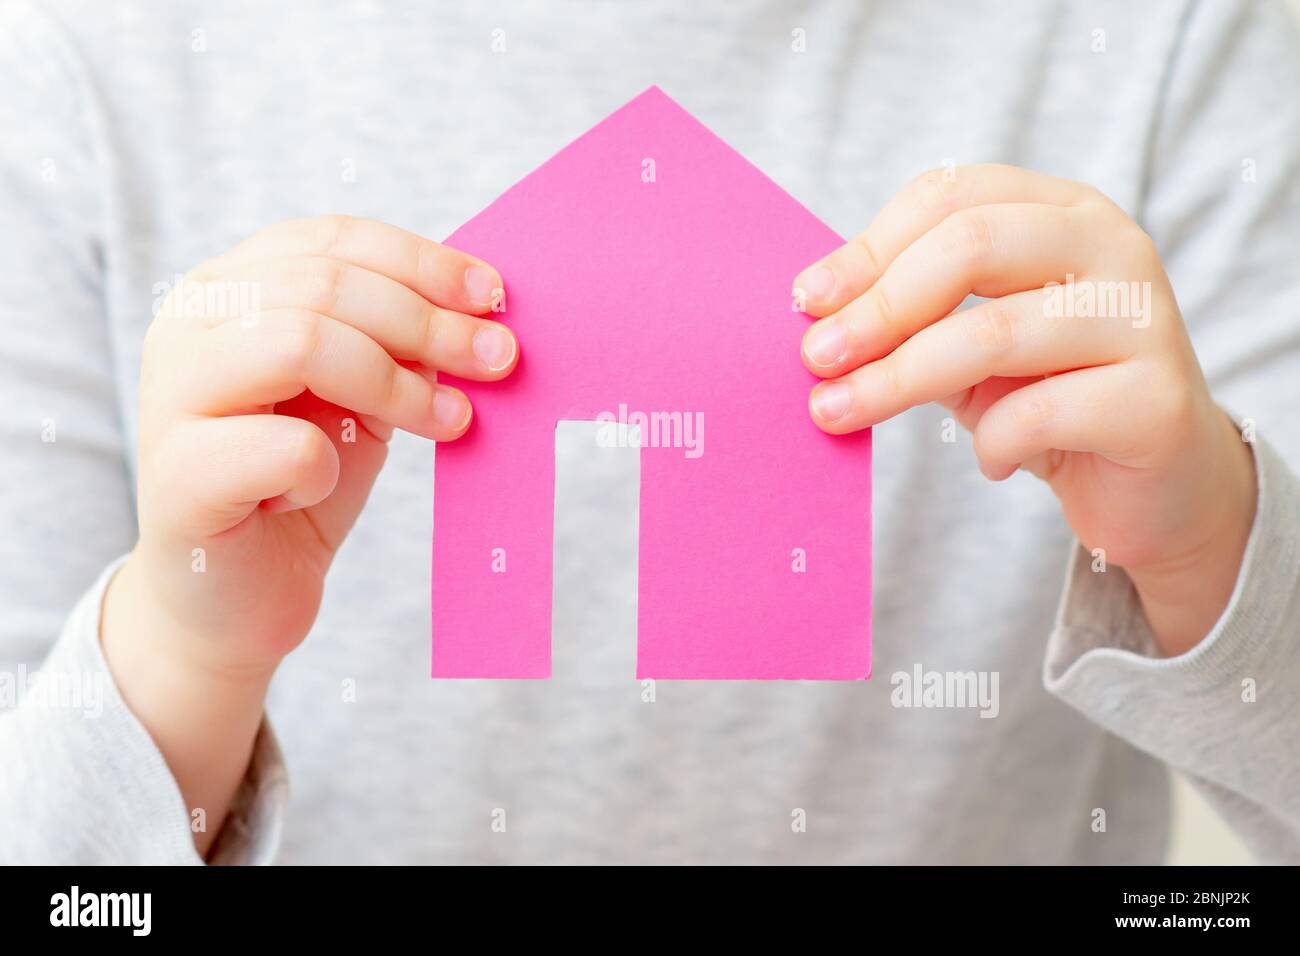 Closeup of hands of child holding paper pink house on white bachground. Housing and family concept. Stock Photo